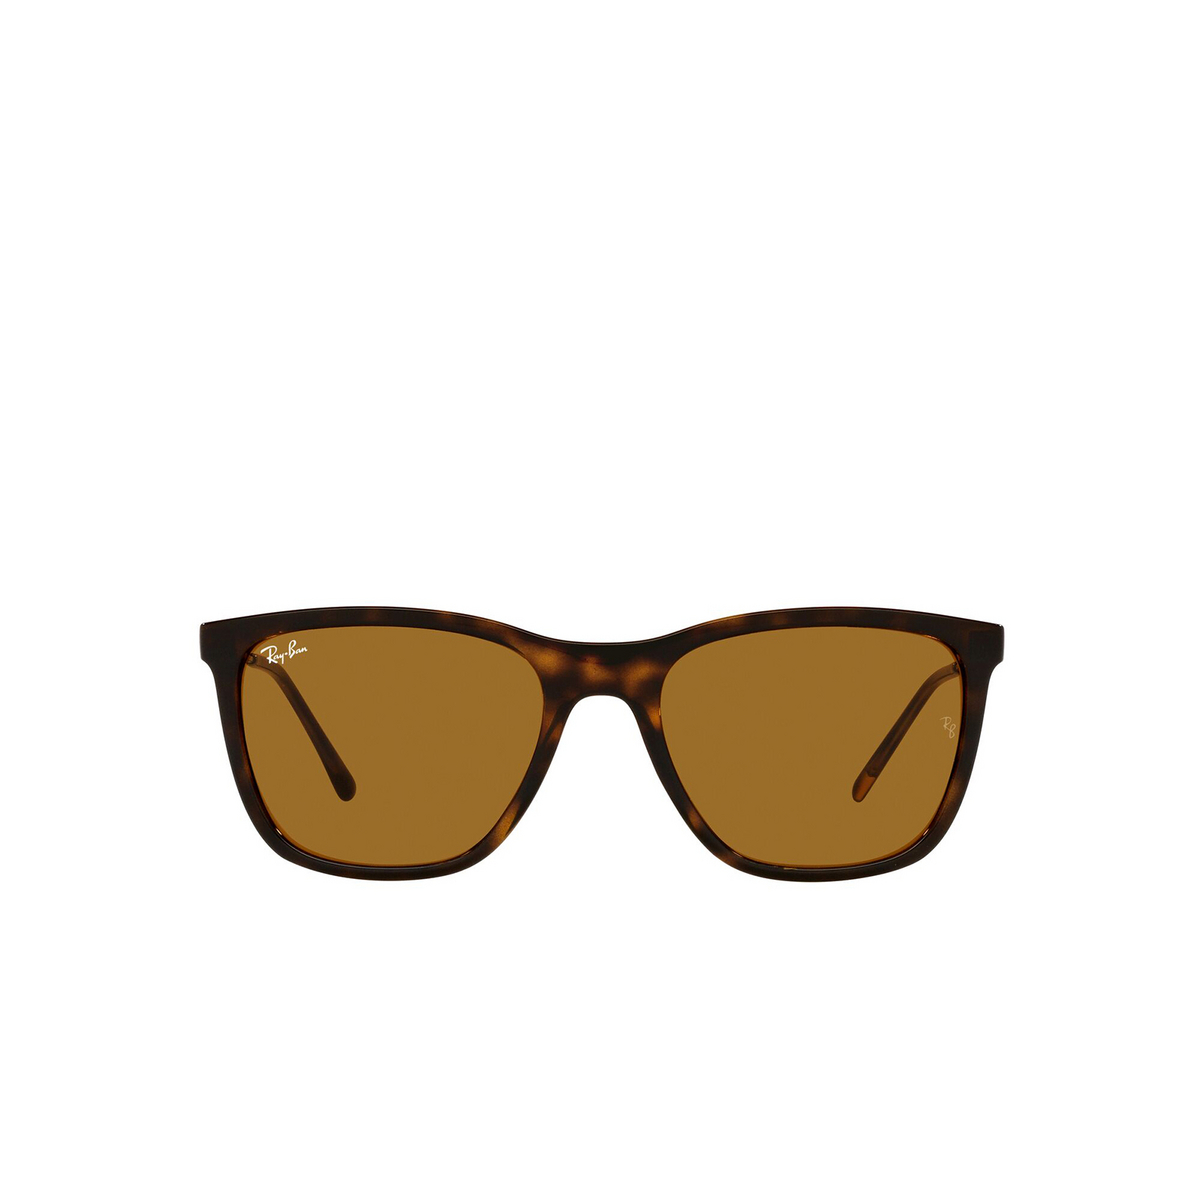 Ray-Ban RB4344 Sunglasses 710/33 Havana - front view